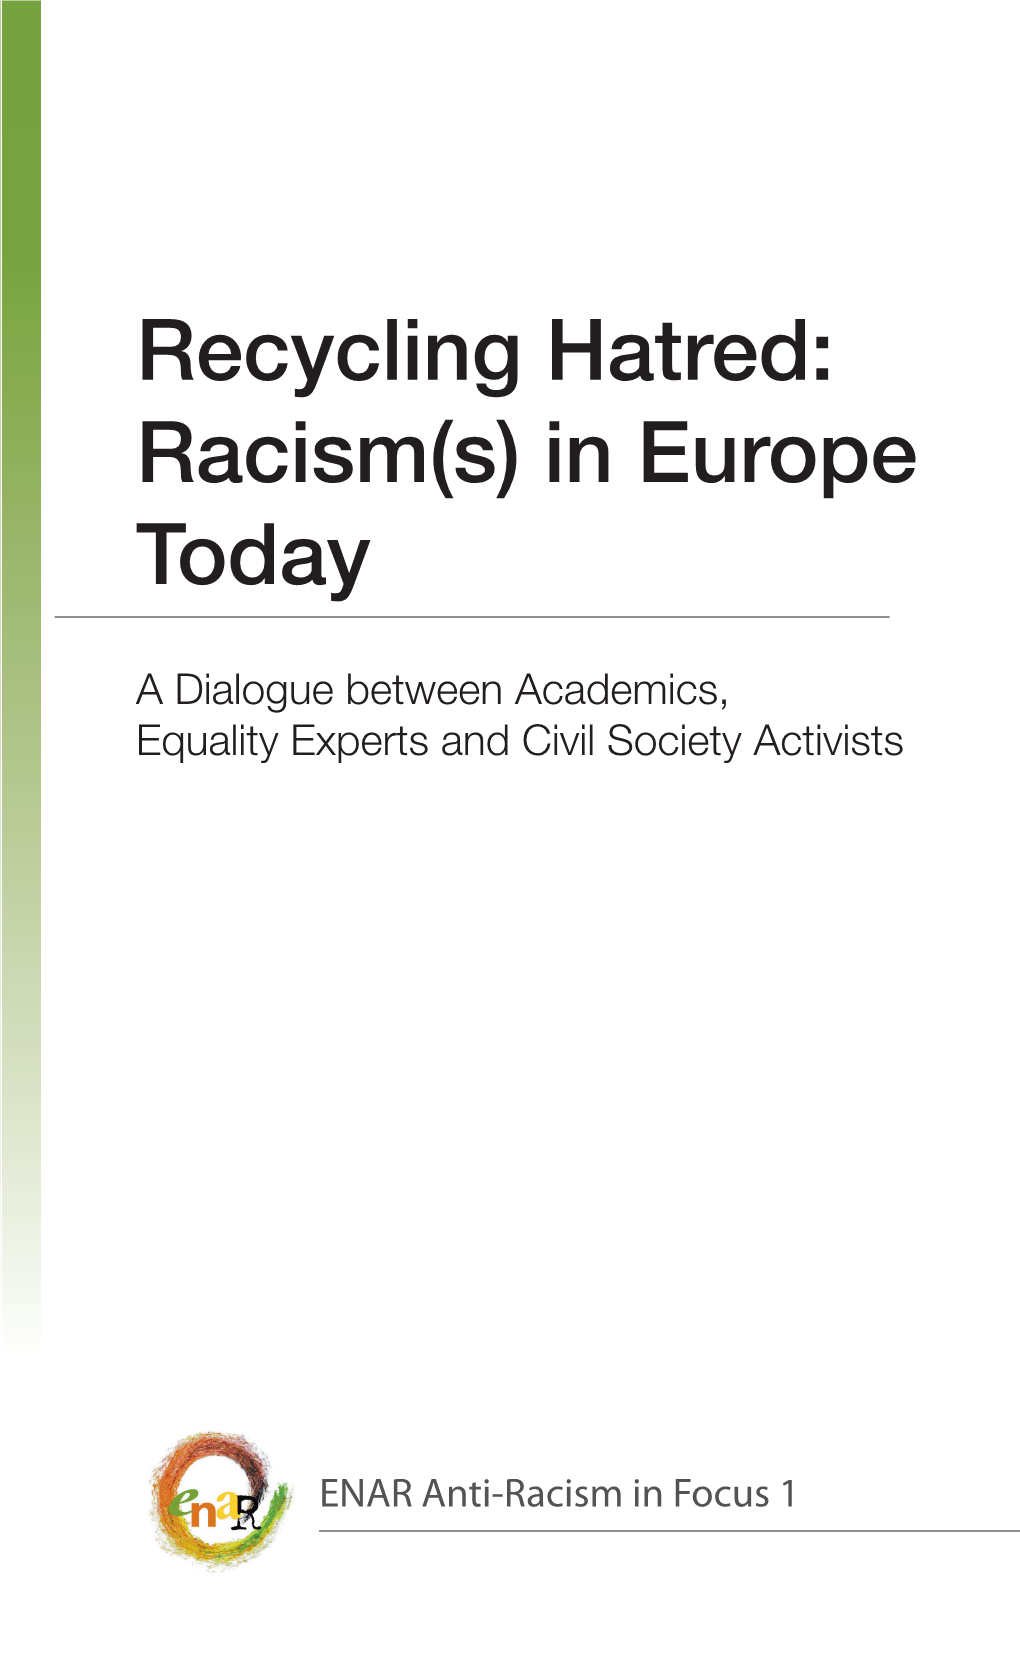 Recycling Hatred: Racism(S) in Europe Today